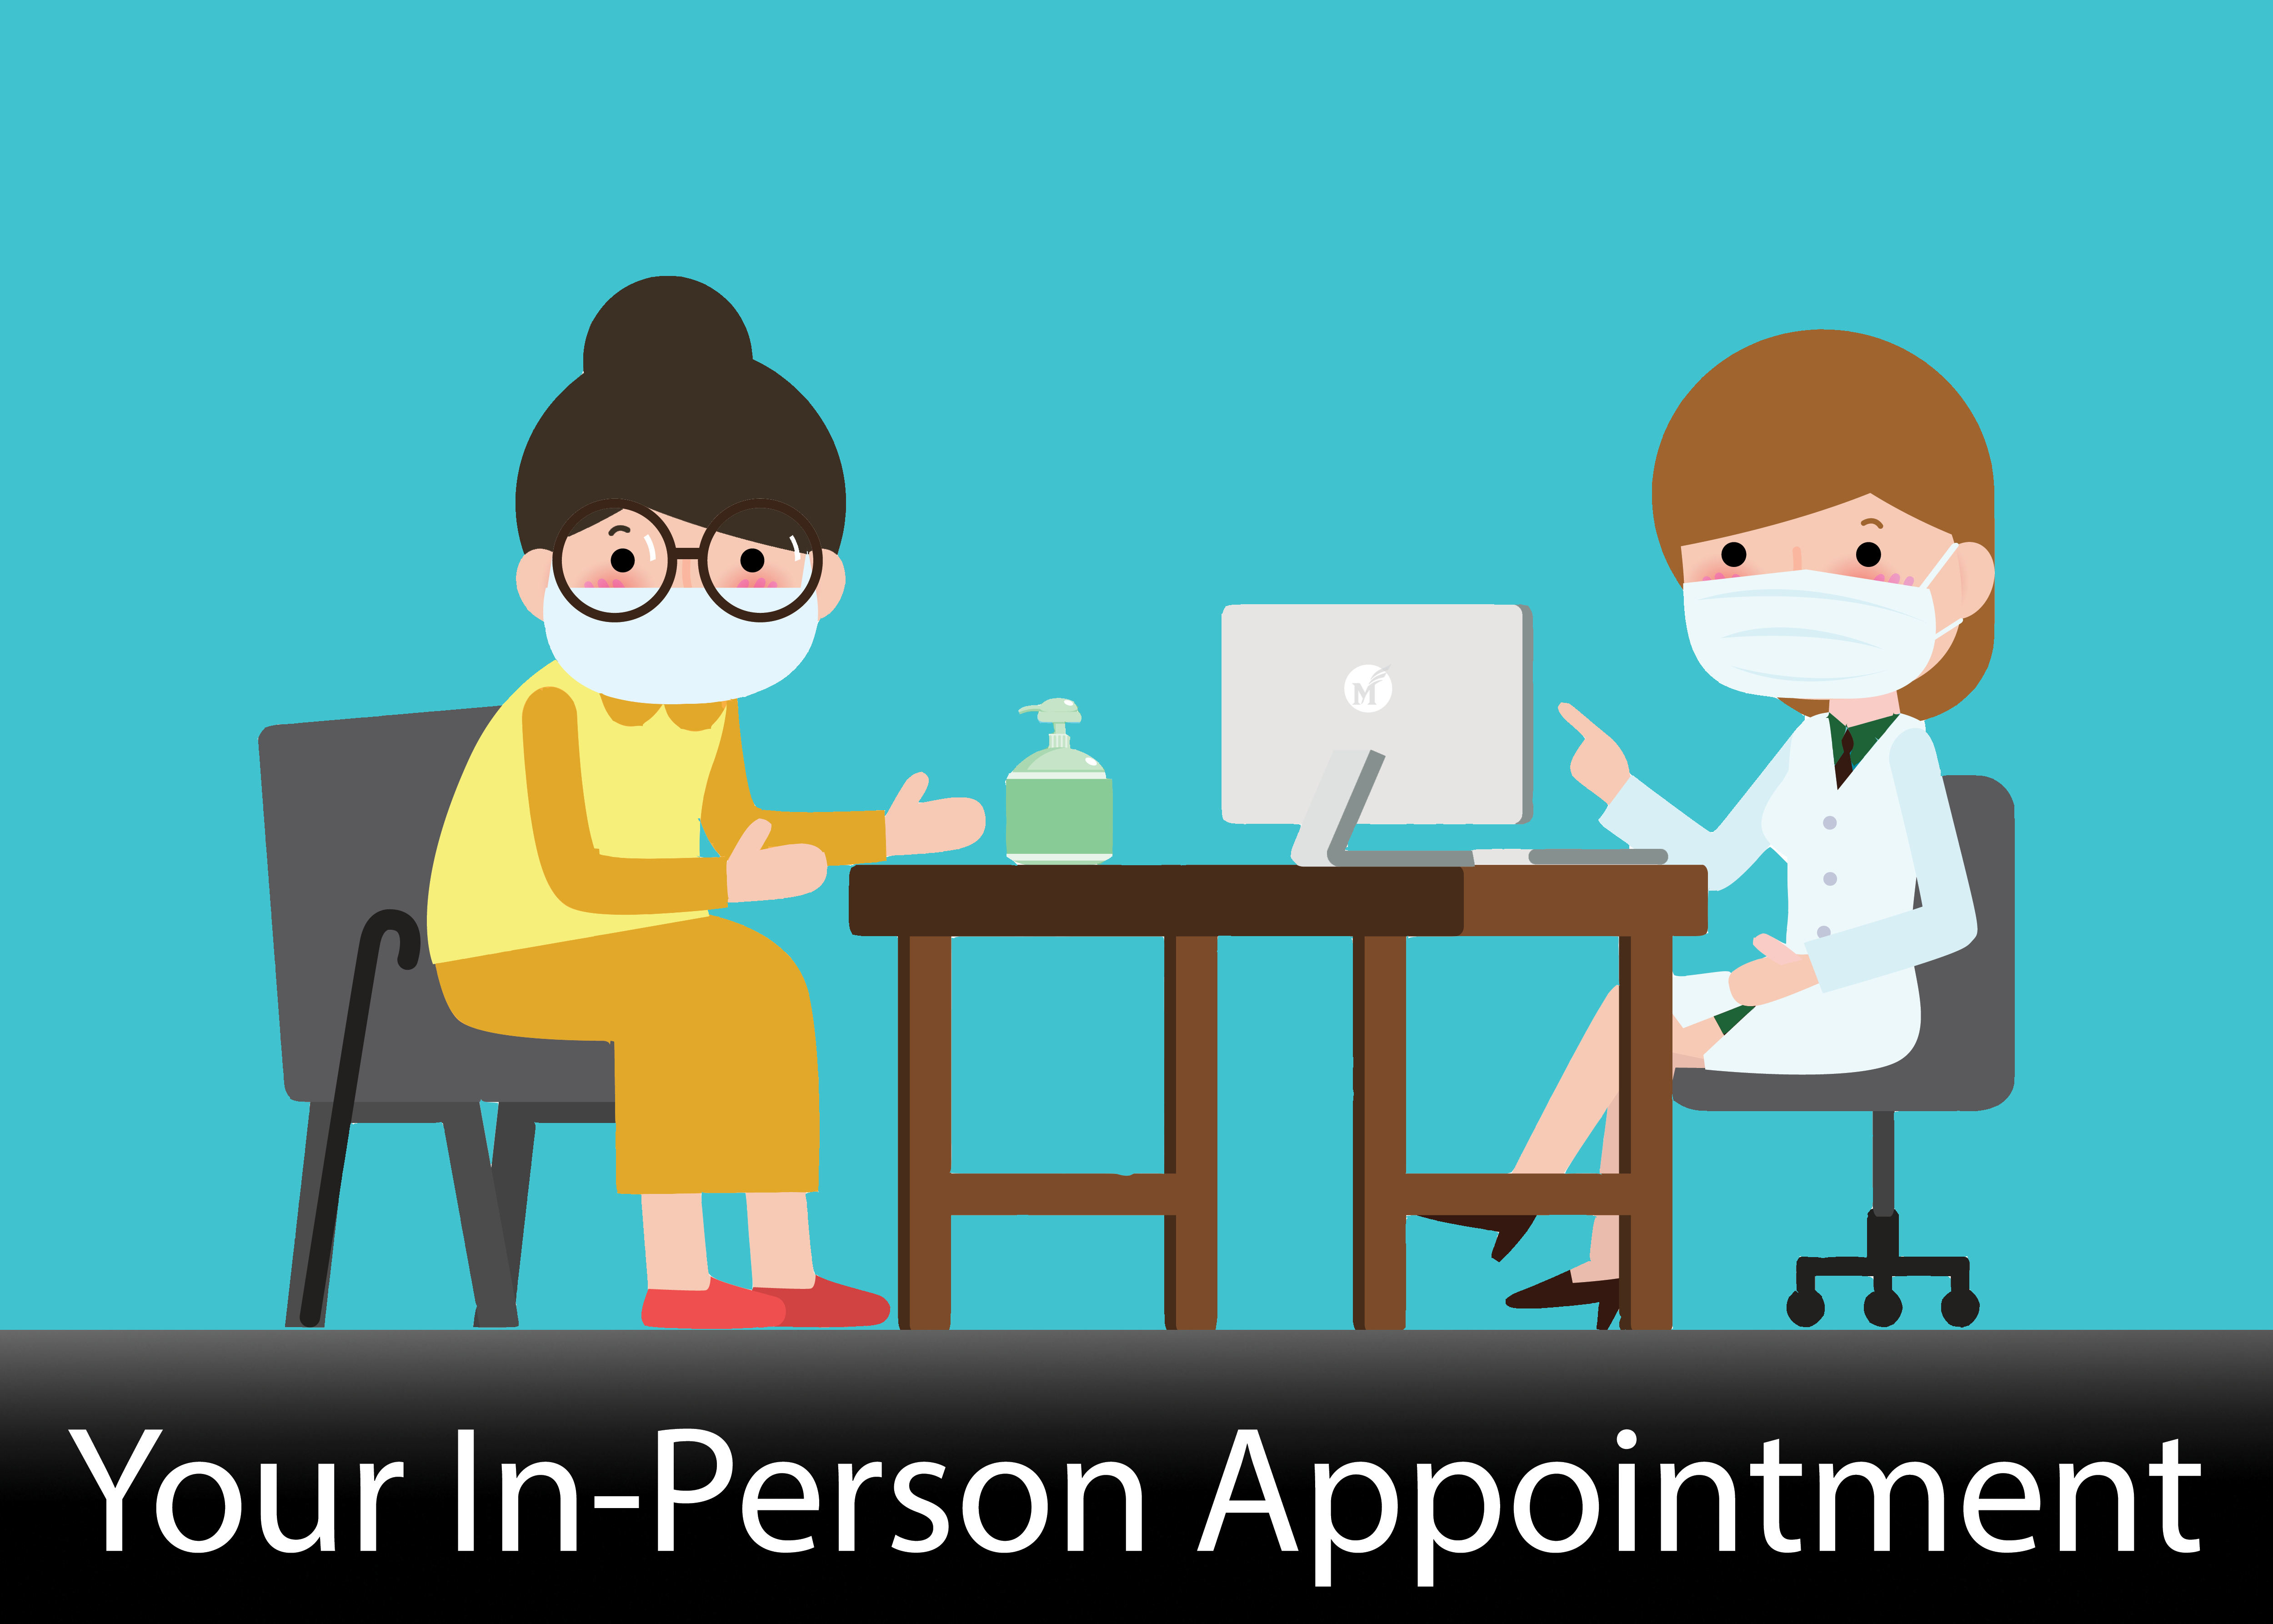 Your In-Person Appointment